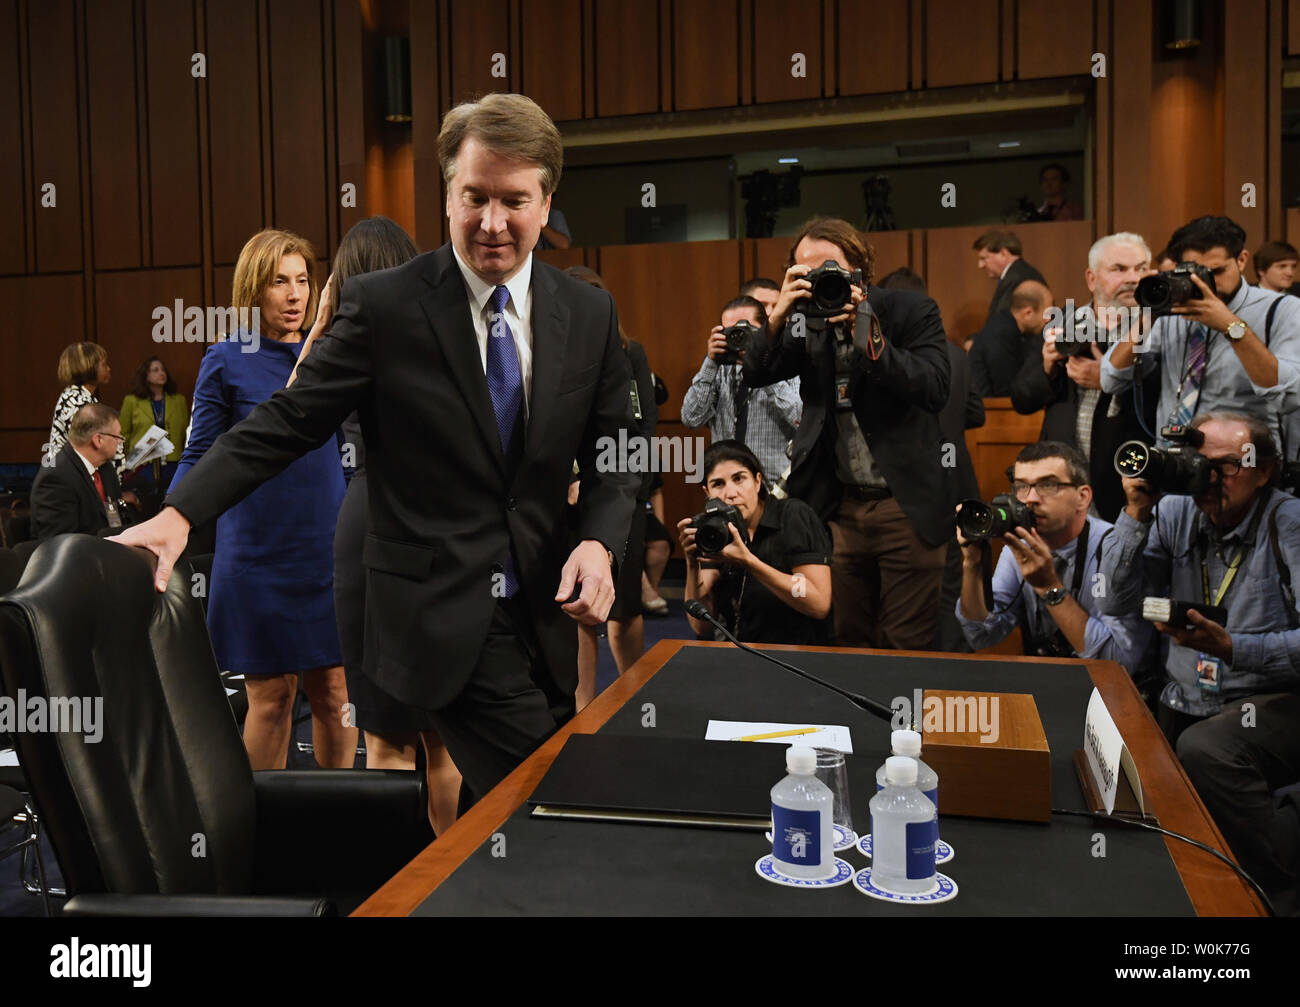 Supreme Court Justice nominee Brett M. Kavanaugh takes his seat after a break during his Senate Judiciary Committee confirmation hearing for the Supreme Court on Capitol Hill in Washington, DC on September 4, 2018. Judge Kavanaugh was nominated to fill the seat of Justice Anthony M. Kennedy who announced his retirement in June.     Photo by Pat Benic/UPI Stock Photo